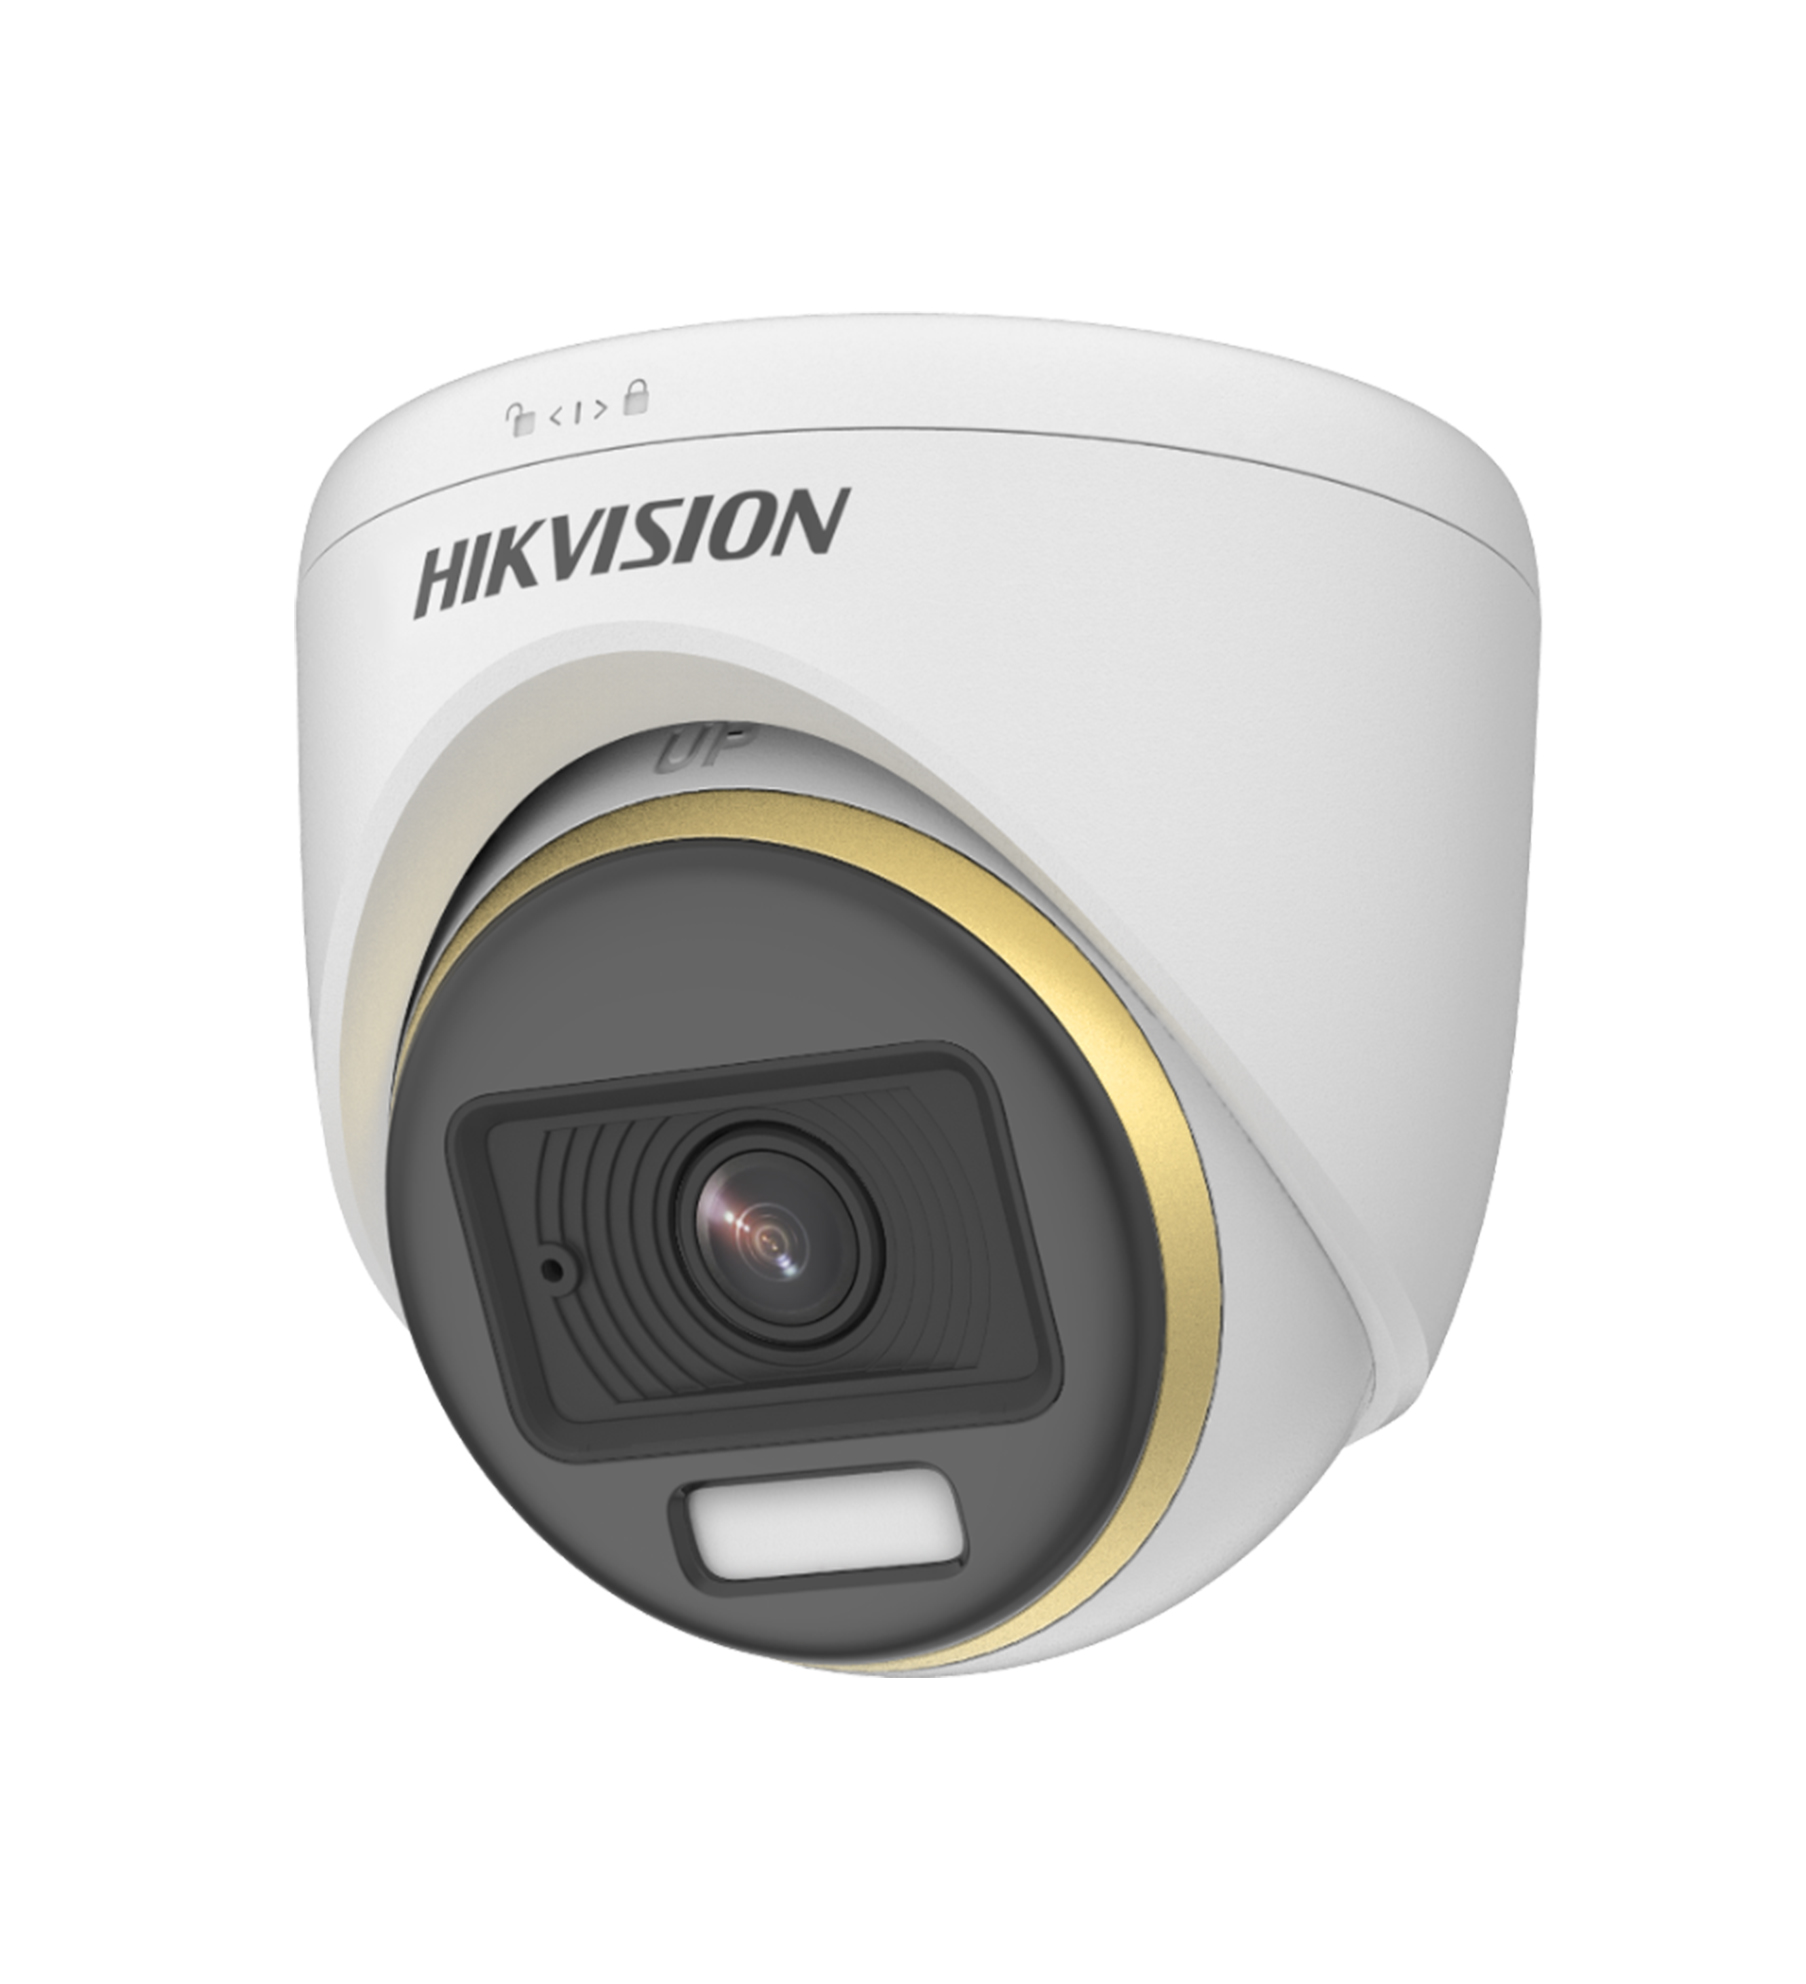 HIKVISION DS-2CE72DF3T-FS Turbo HD Camera